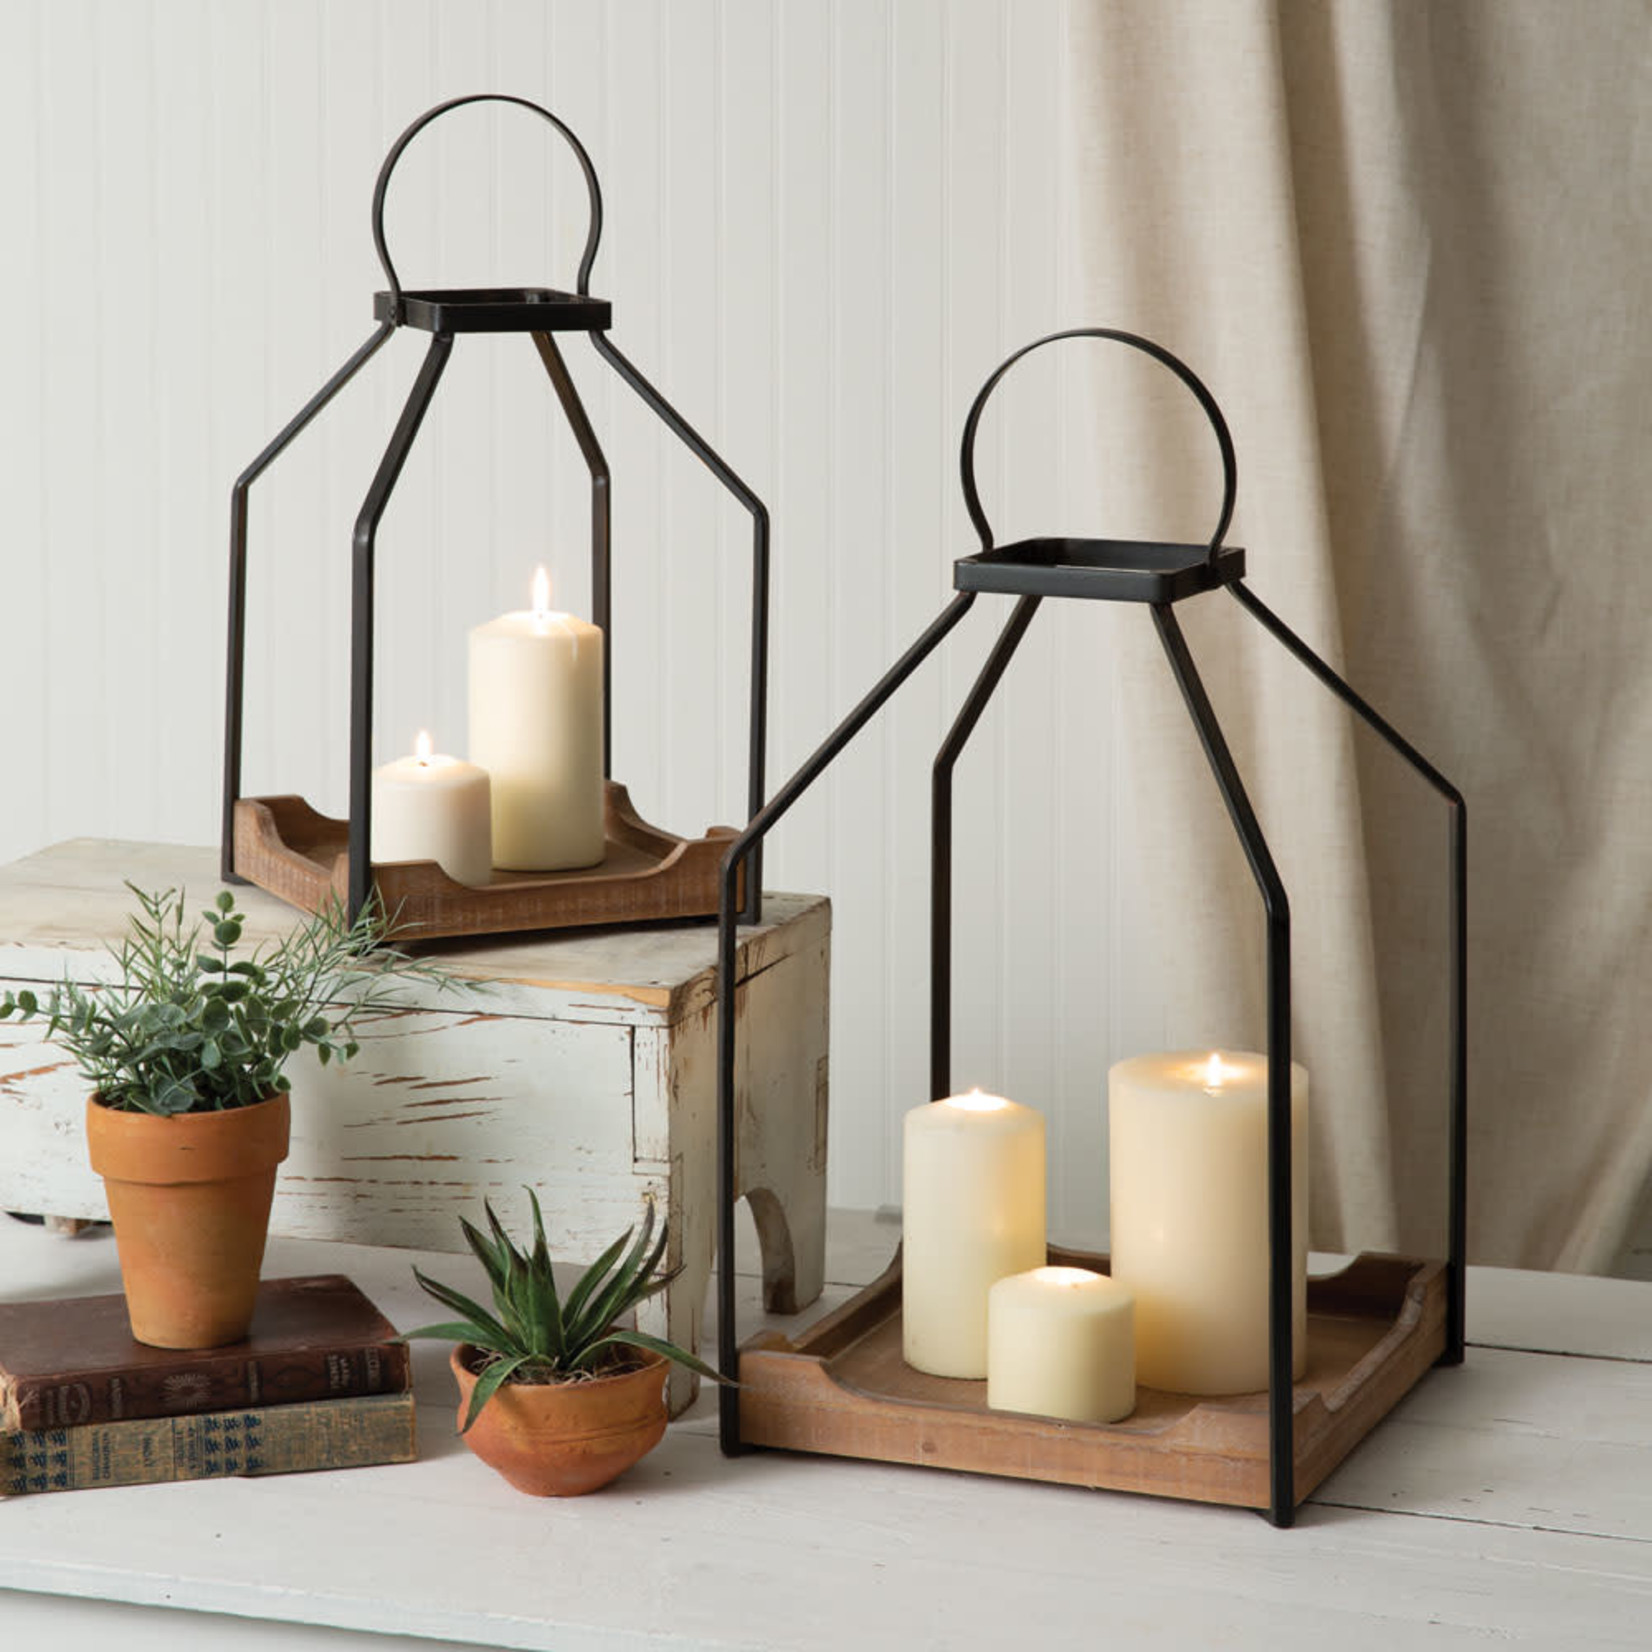 CTW Home Collection Everett Lanterns - Set of Two